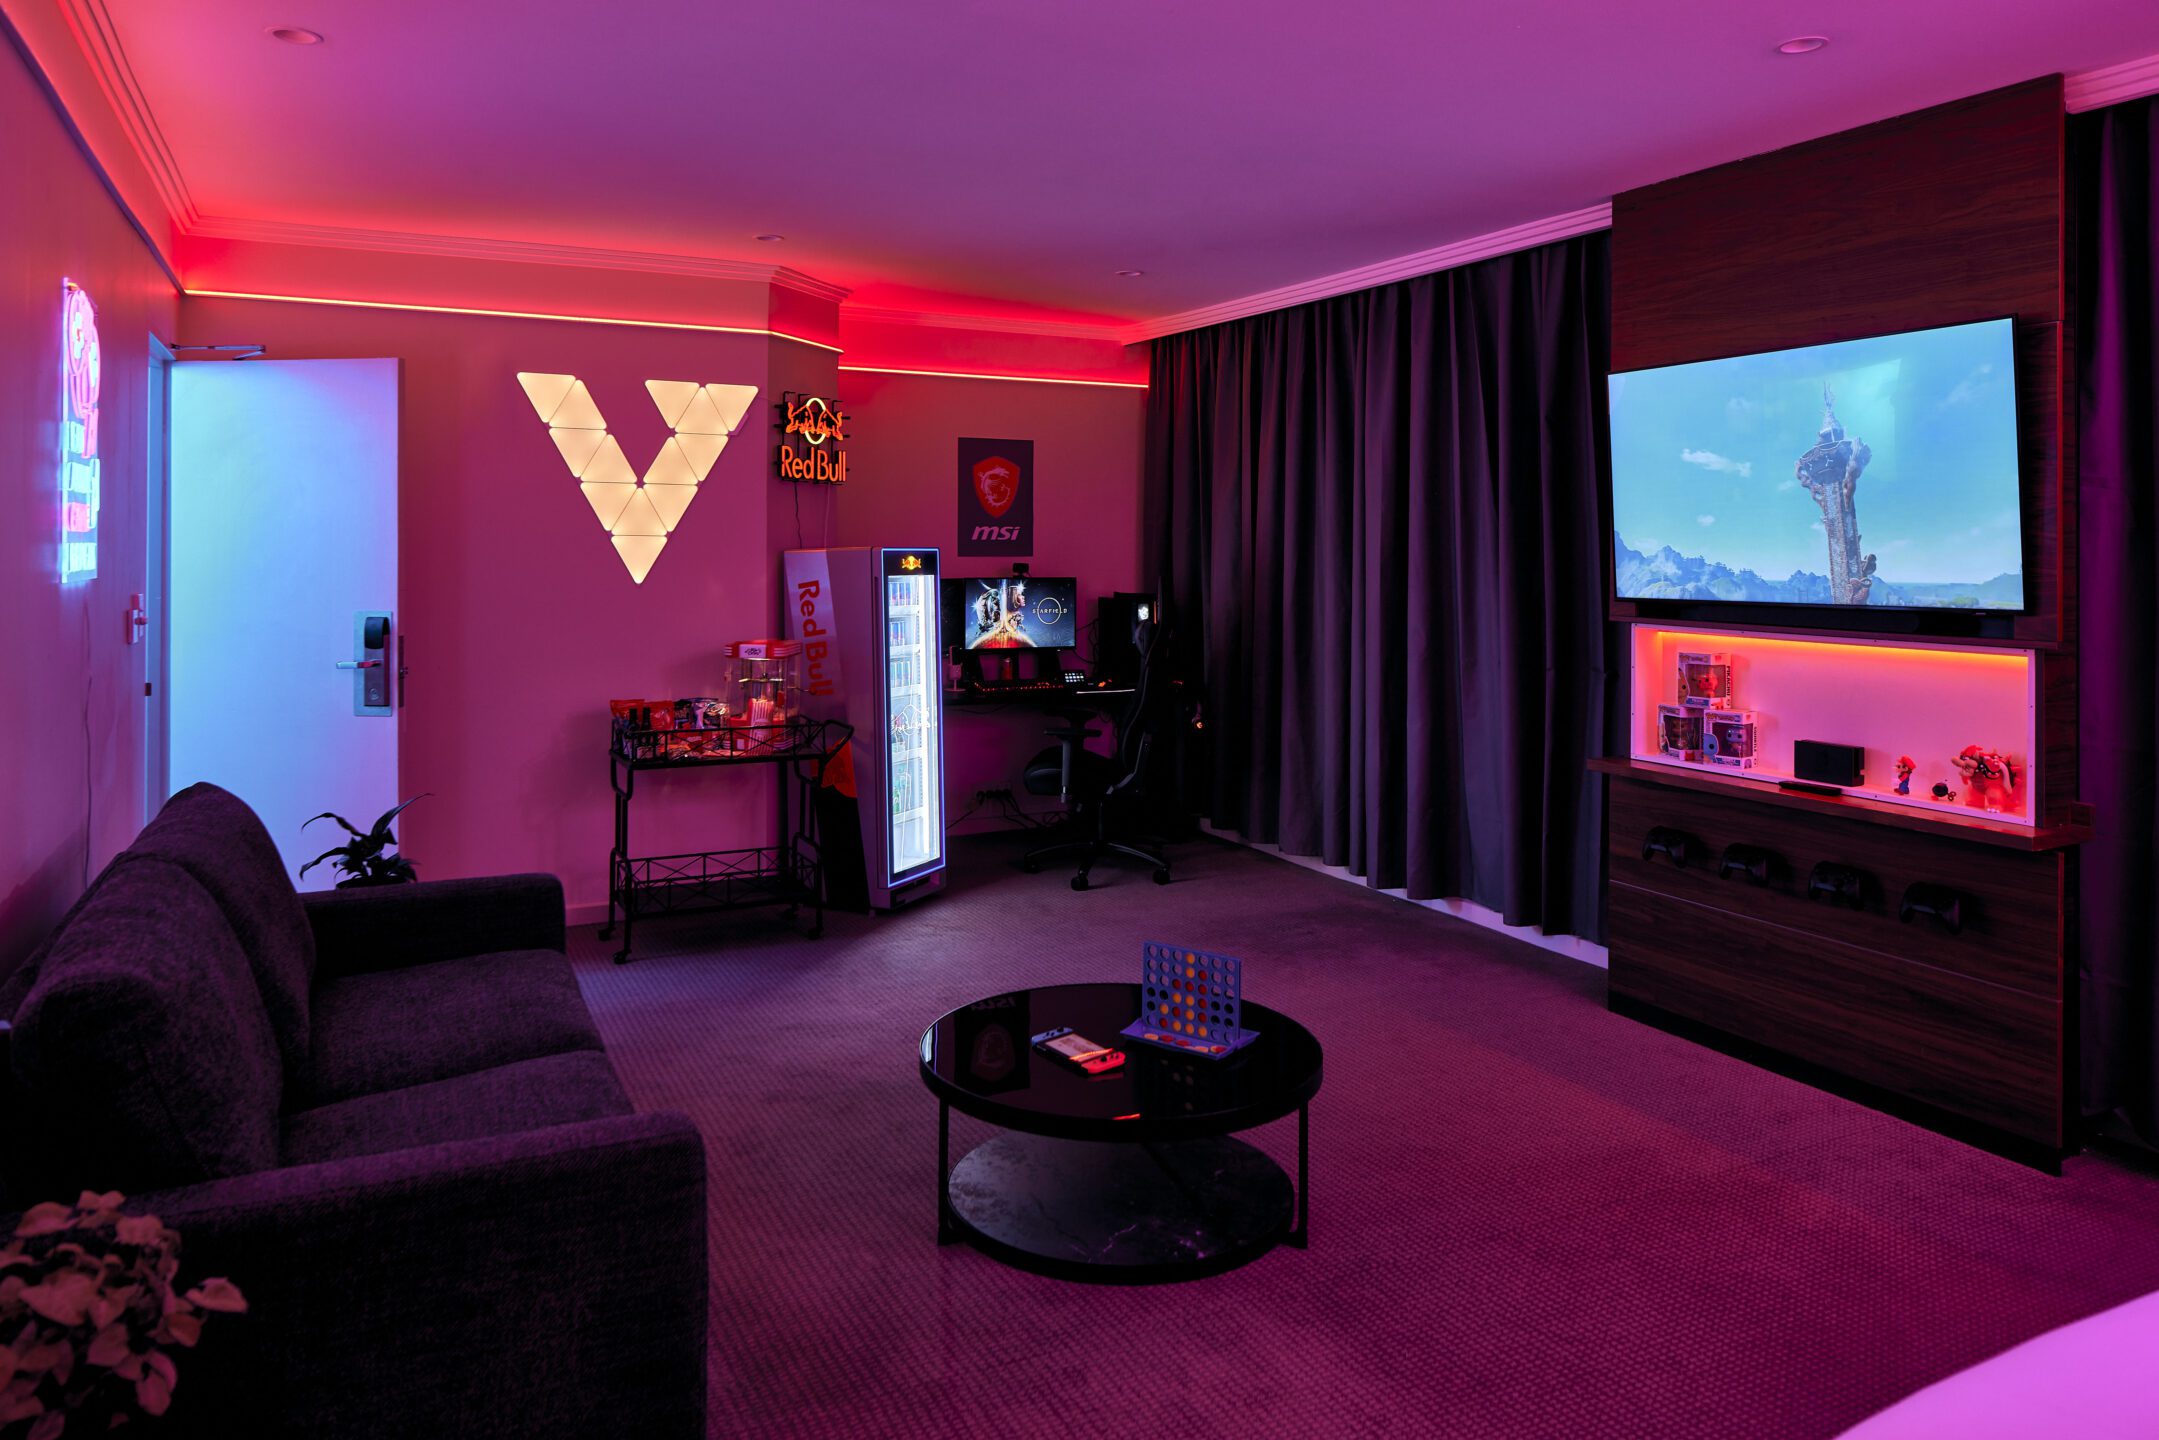 View Hotel - Gaming Room